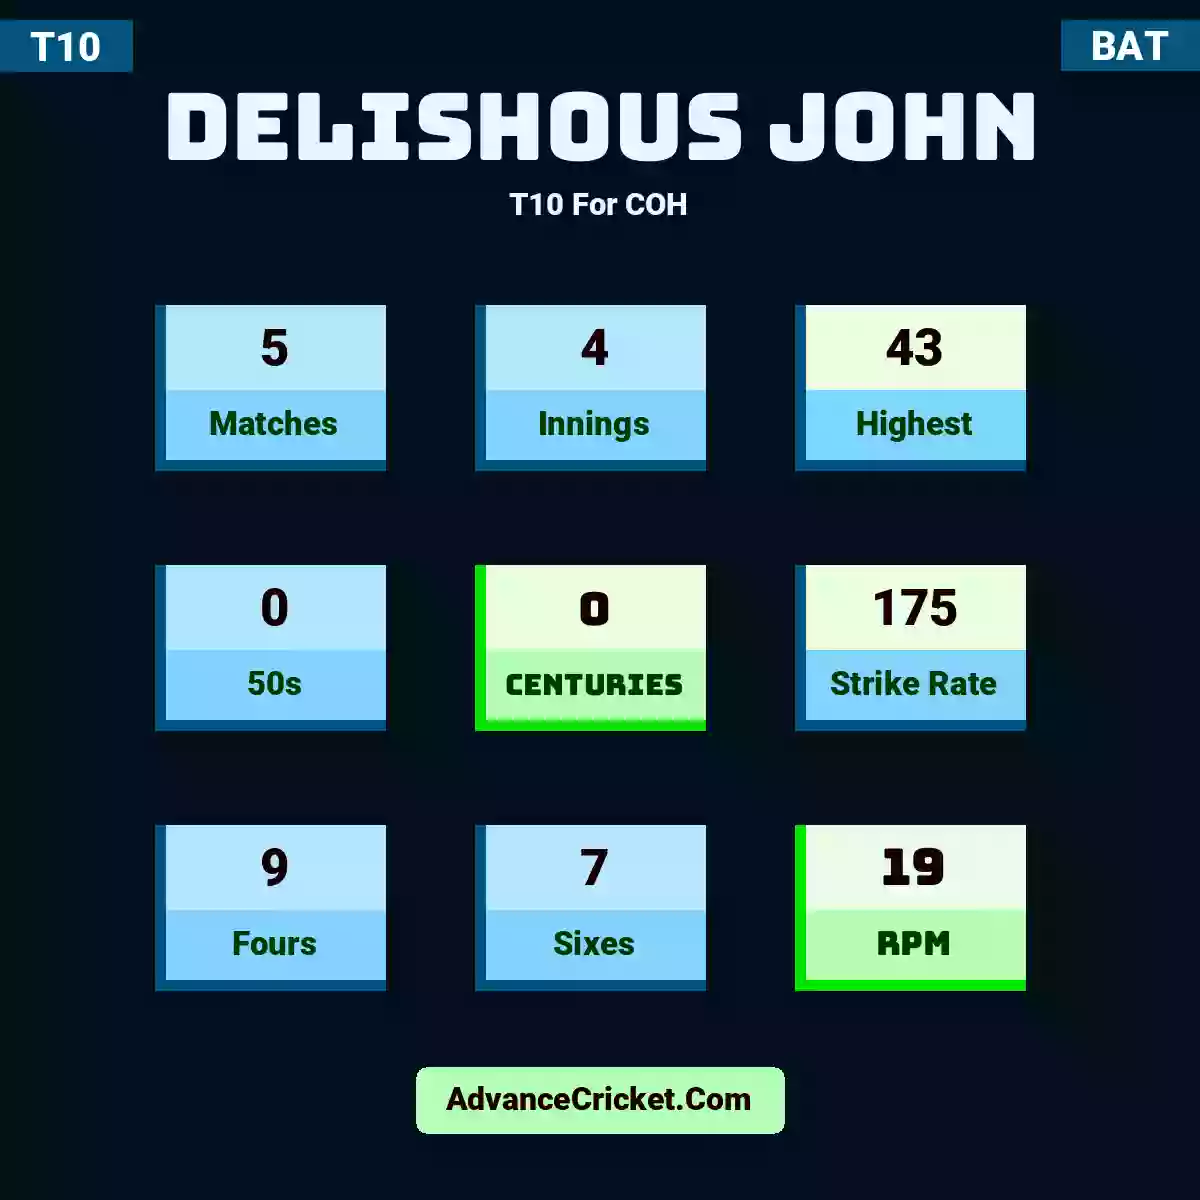 Delishous John T10  For COH, Delishous John played 5 matches, scored 43 runs as highest, 0 half-centuries, and 0 centuries, with a strike rate of 175. D.John hit 9 fours and 7 sixes, with an RPM of 19.